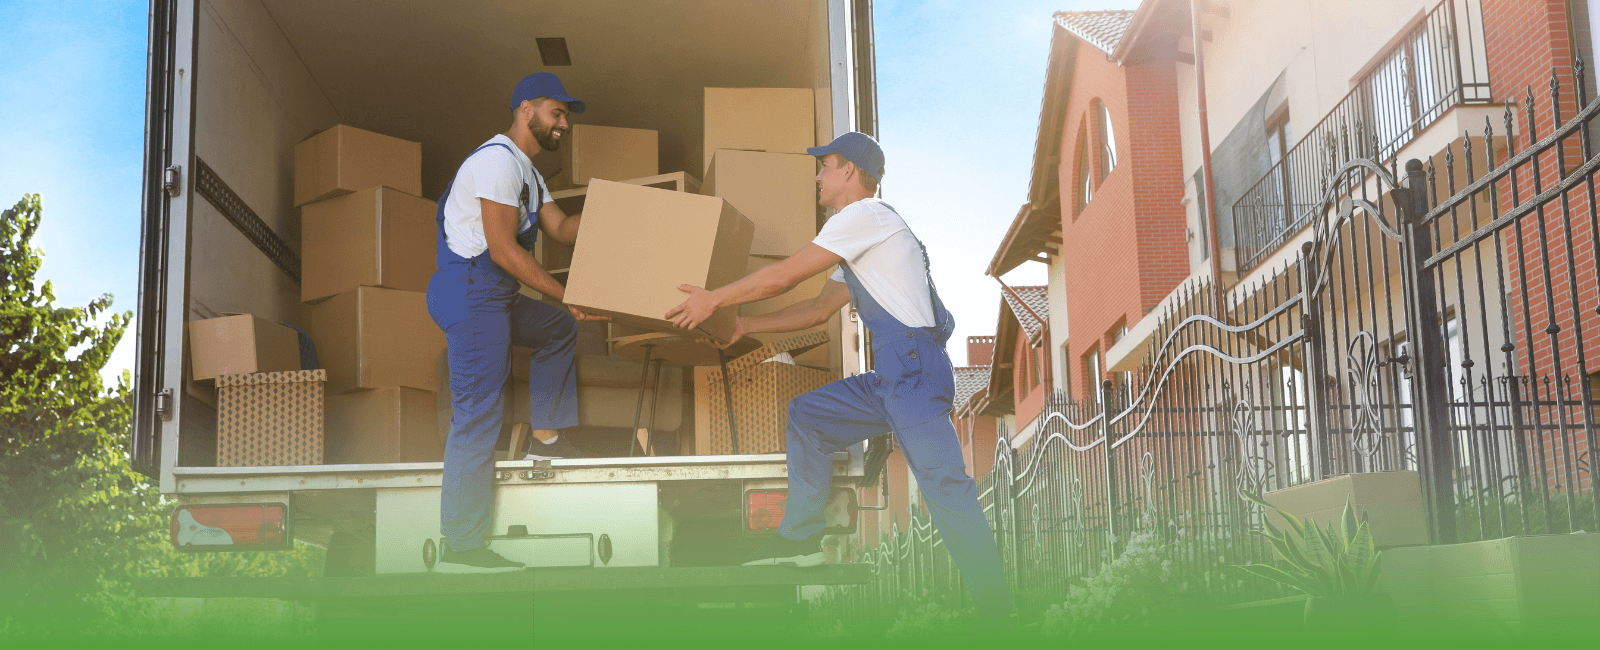 Our home packers movers in pakistan team in action providing seamless courier delivery